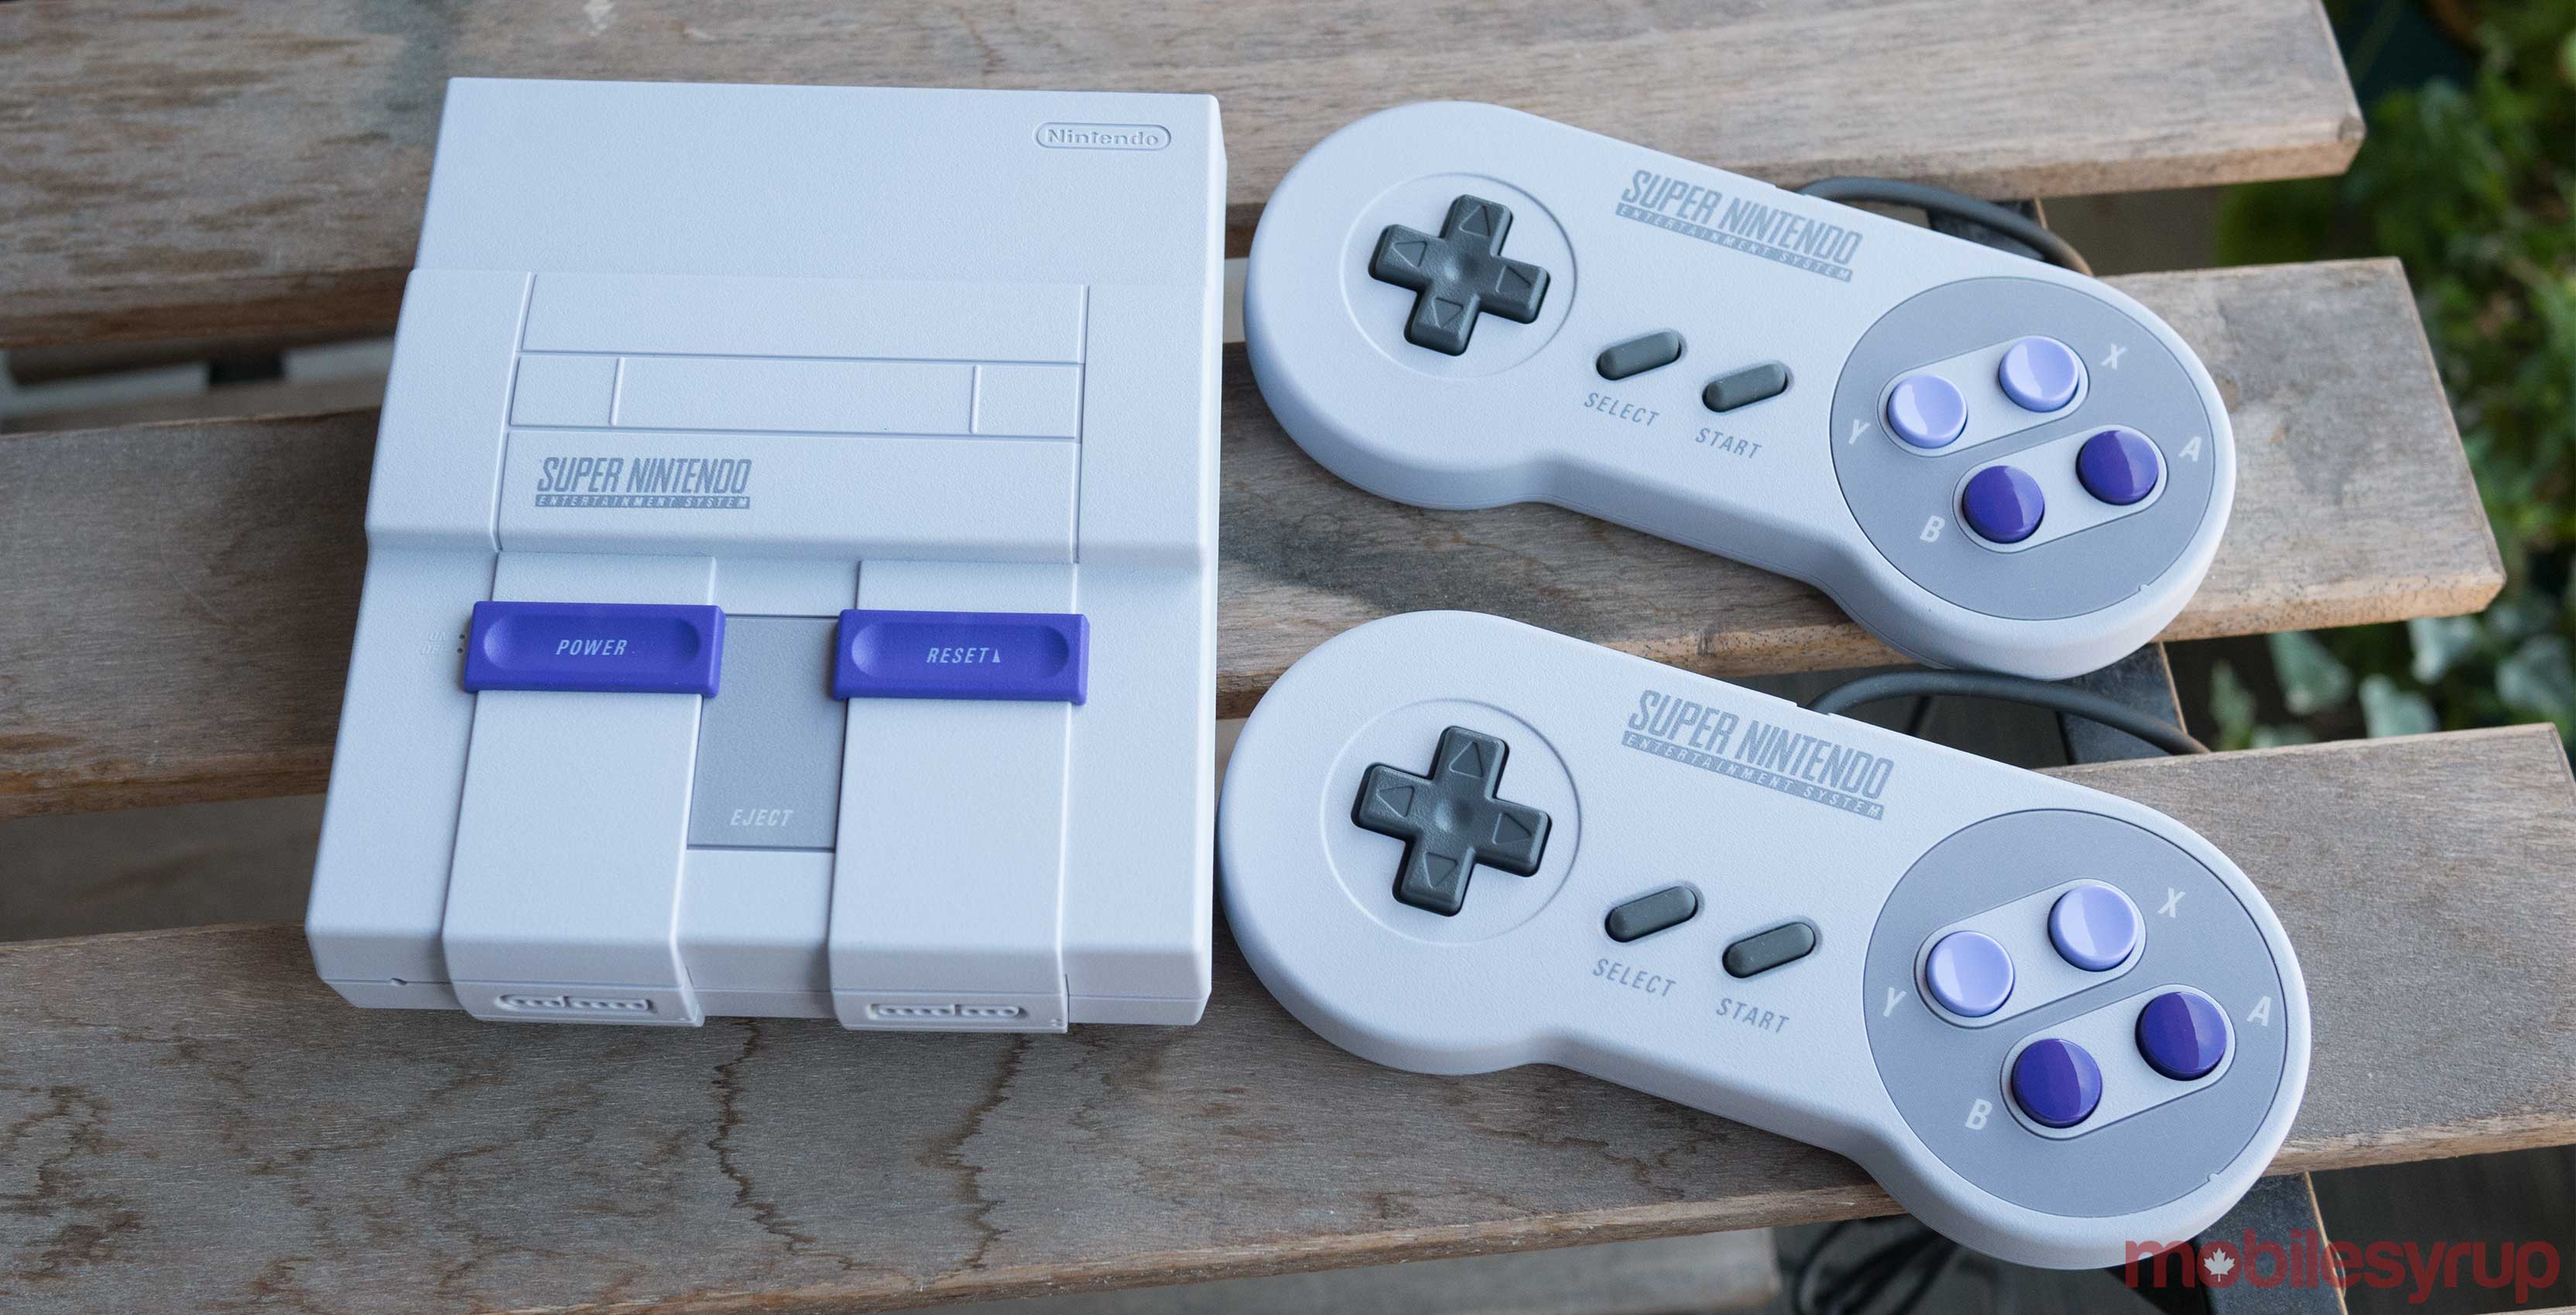 SNES Classic Edition with remotes